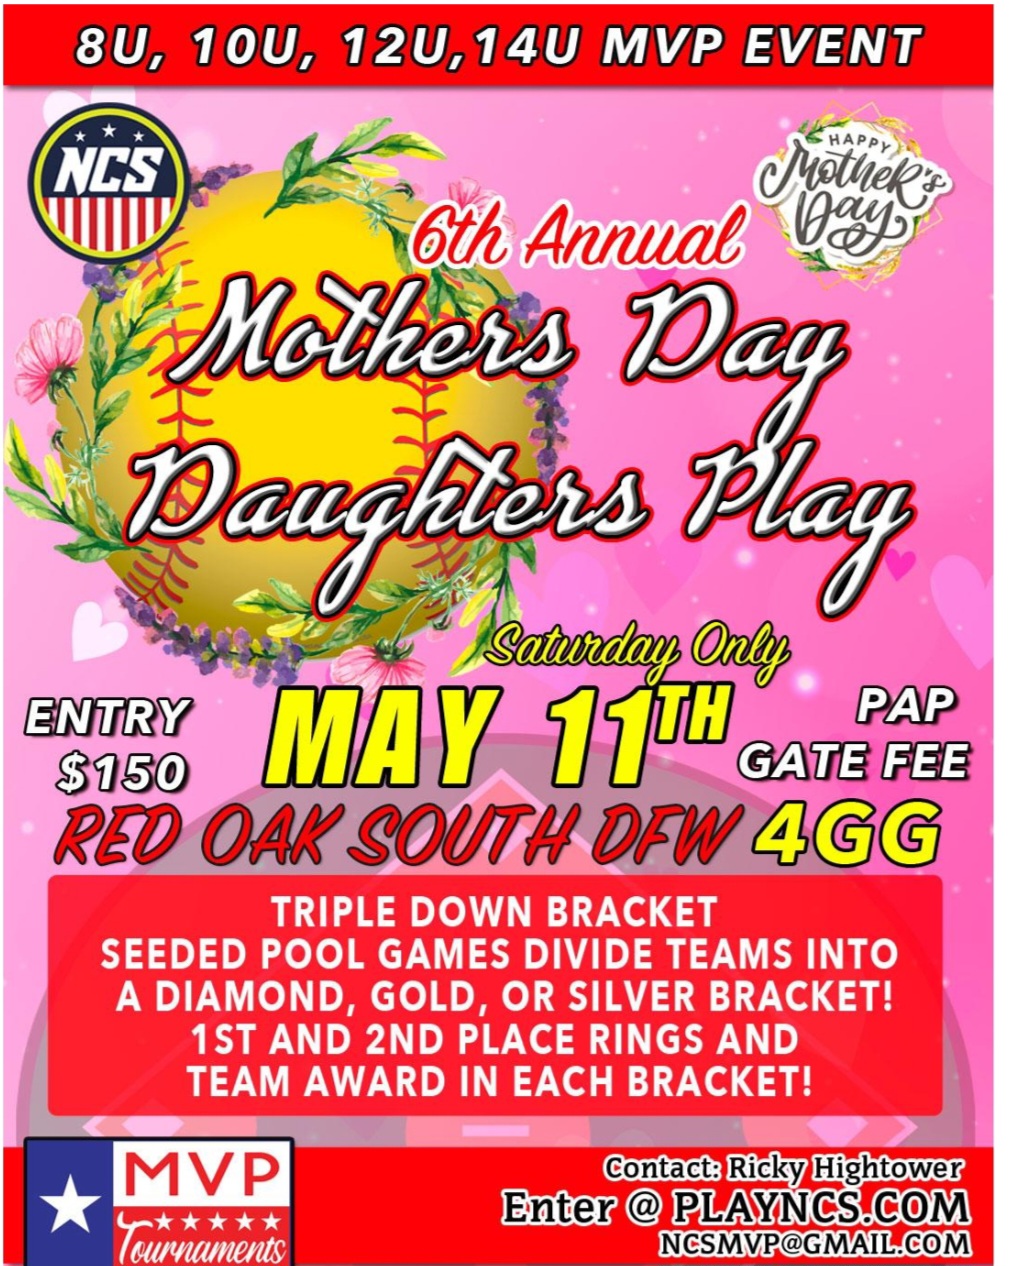 NCS 6TH ANNIUAL MOTHERS DAY DAUGHTERS PLAY MVP EVENT 1 DAY SATURDAY Logo